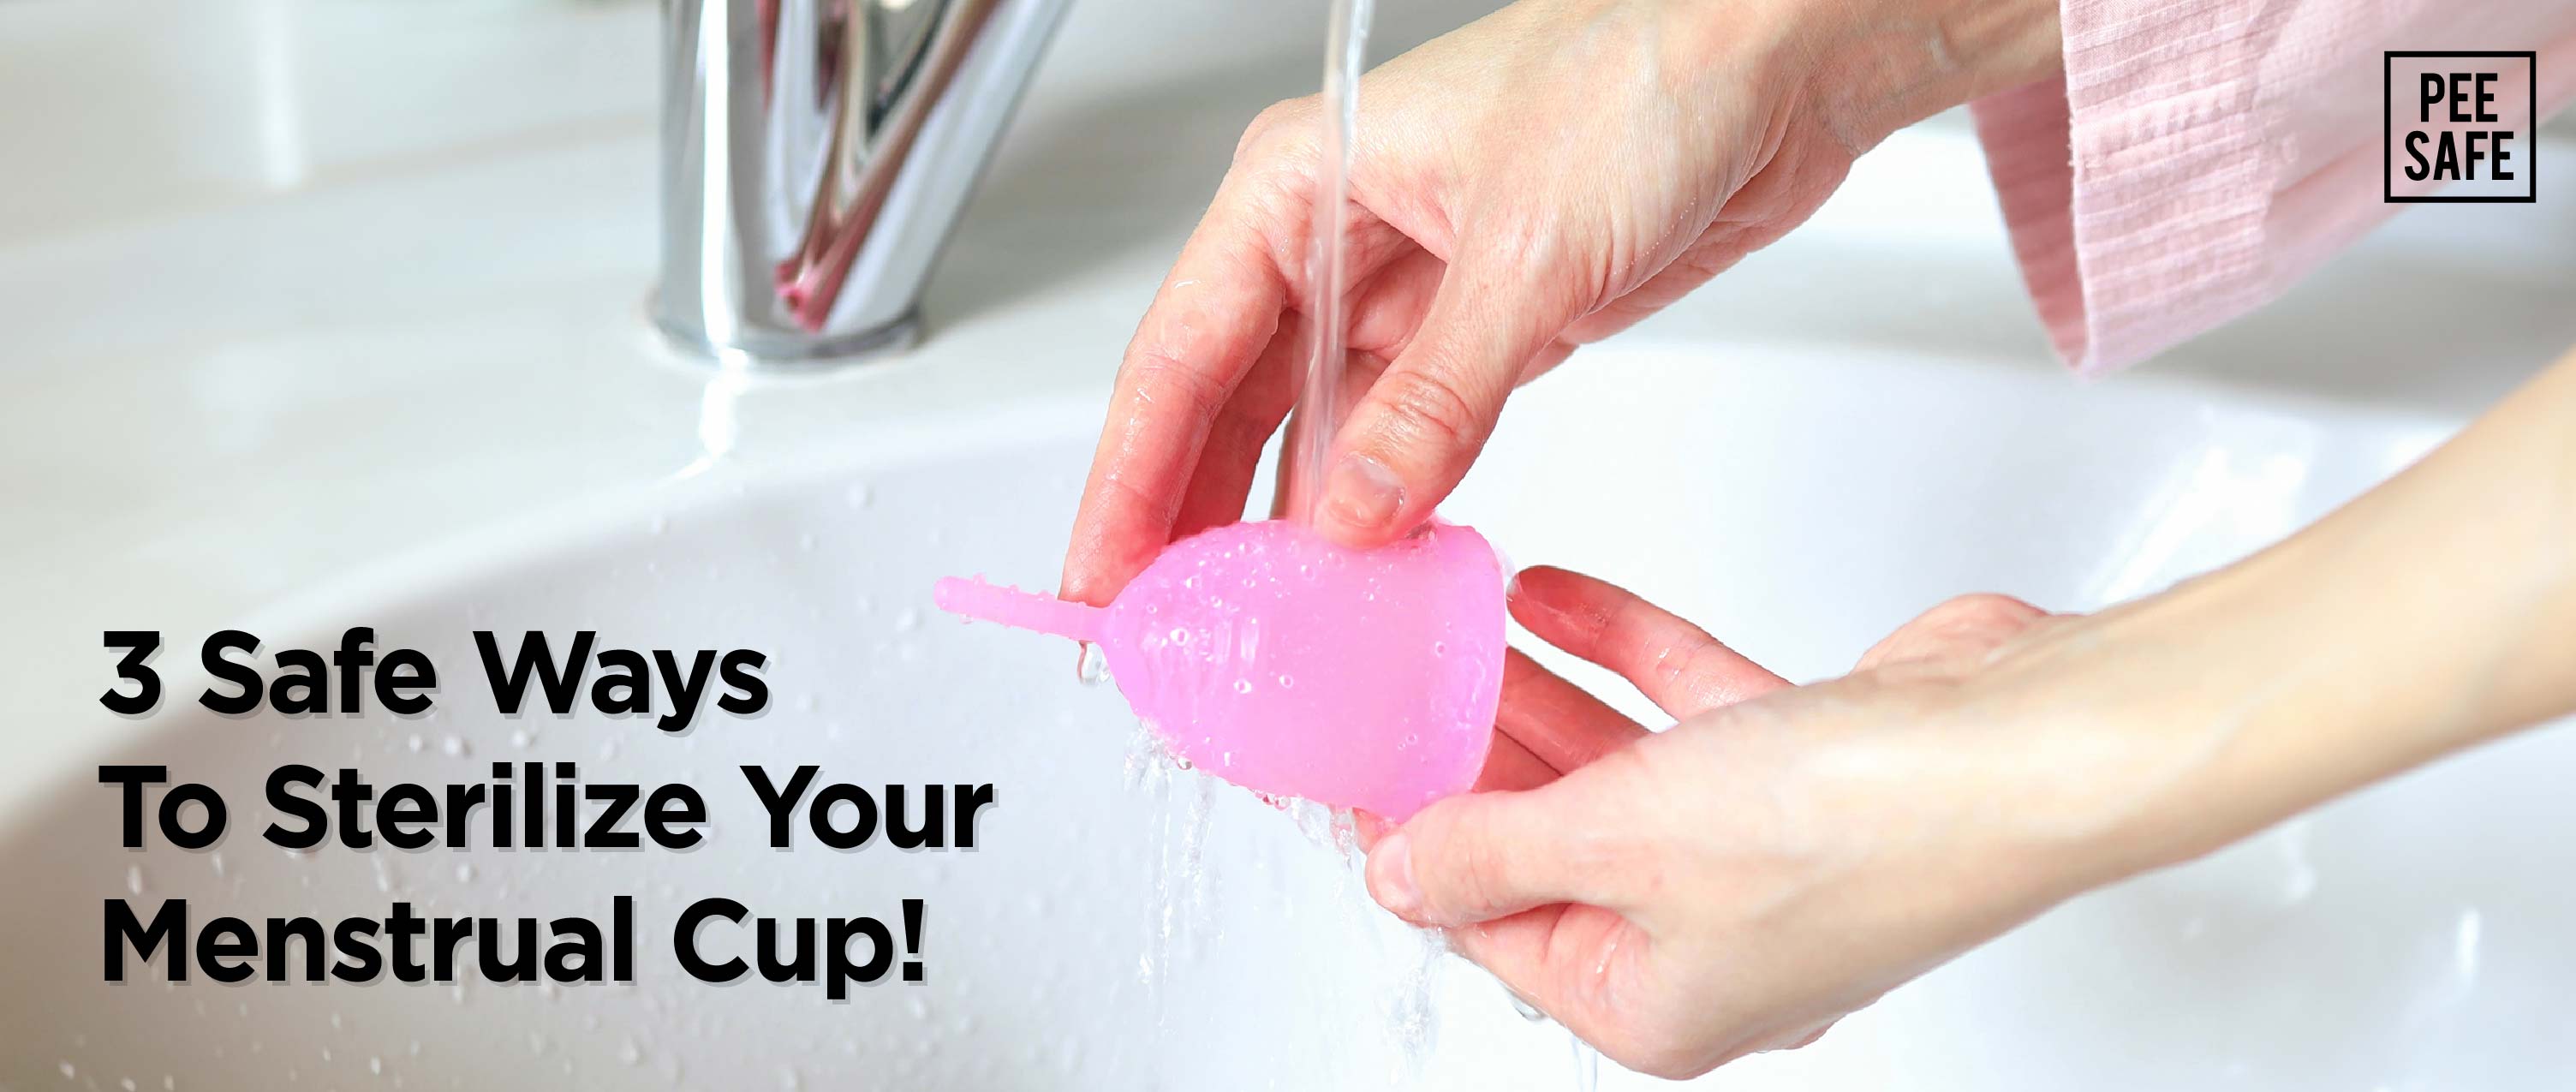 3 Safe Ways To Sterilize Your Menstrual Cup!